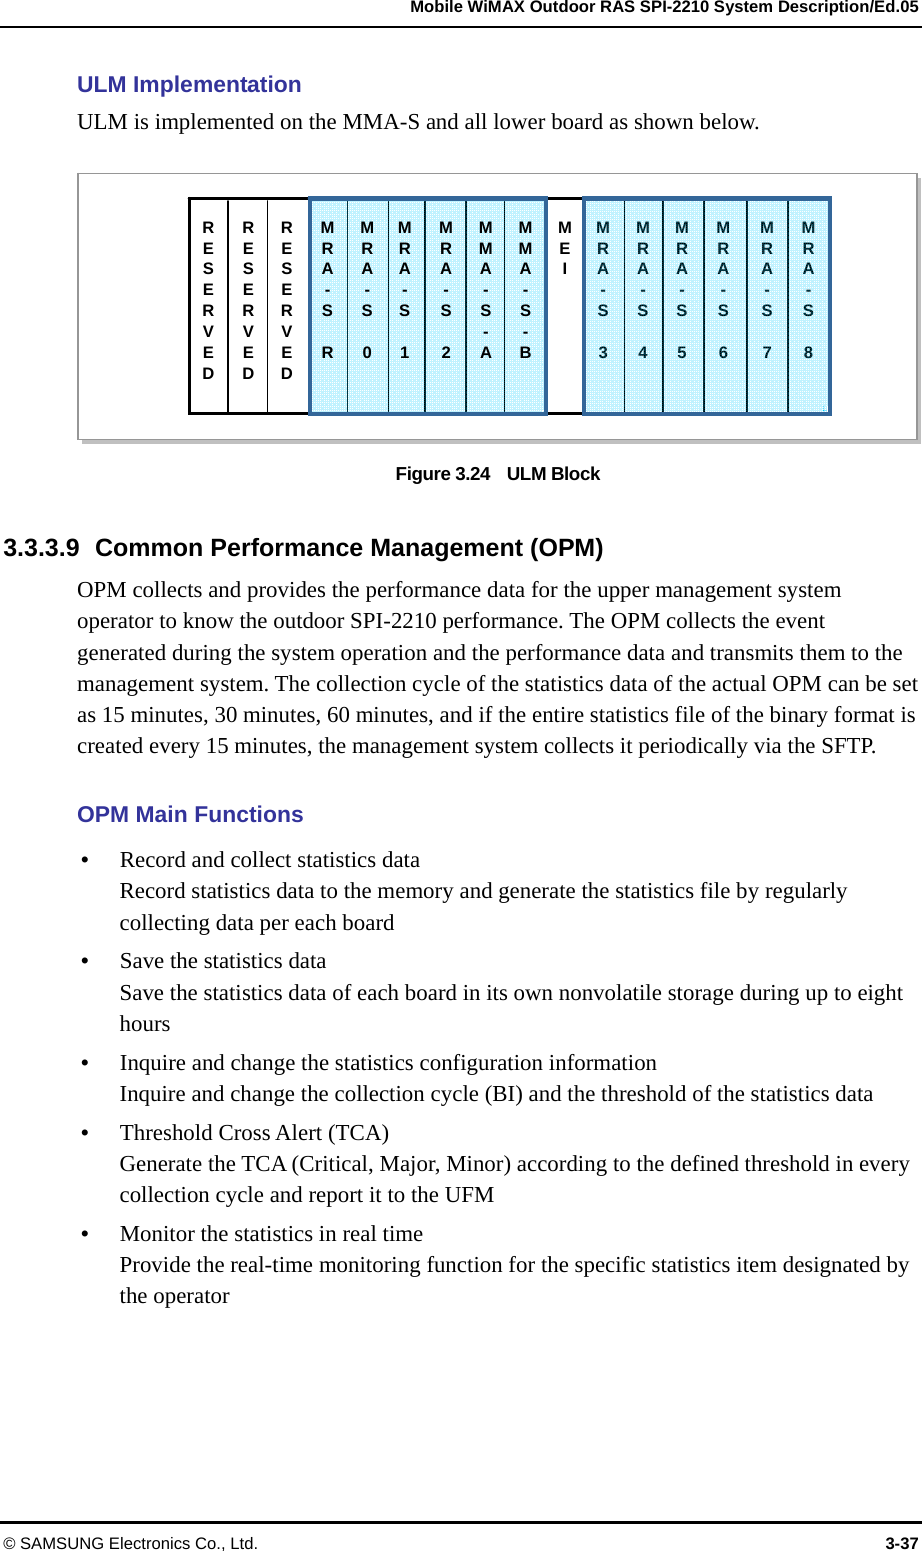   Mobile WiMAX Outdoor RAS SPI-2210 System Description/Ed.05 © SAMSUNG Electronics Co., Ltd.  3-37 ULM Implementation ULM is implemented on the MMA-S and all lower board as shown below.  Figure 3.24    ULM Block  3.3.3.9  Common Performance Management (OPM) OPM collects and provides the performance data for the upper management system operator to know the outdoor SPI-2210 performance. The OPM collects the event generated during the system operation and the performance data and transmits them to the management system. The collection cycle of the statistics data of the actual OPM can be set as 15 minutes, 30 minutes, 60 minutes, and if the entire statistics file of the binary format is created every 15 minutes, the management system collects it periodically via the SFTP.  OPM Main Functions    Record and collect statistics data Record statistics data to the memory and generate the statistics file by regularly collecting data per each board  Save the statistics data Save the statistics data of each board in its own nonvolatile storage during up to eight hours  Inquire and change the statistics configuration information Inquire and change the collection cycle (BI) and the threshold of the statistics data  Threshold Cross Alert (TCA) Generate the TCA (Critical, Major, Minor) according to the defined threshold in every collection cycle and report it to the UFM  Monitor the statistics in real time Provide the real-time monitoring function for the specific statistics item designated by the operator  RESERVED MRA- S  R MMA-S- AMMA-S- BMEI RESERVED RESERVED MRA- S 0MRA- S 1MRA- S 2MRA- S 3MRA- S 4MRA- S 5MRA- S  6 MRA- S  7 MRA- S  8 